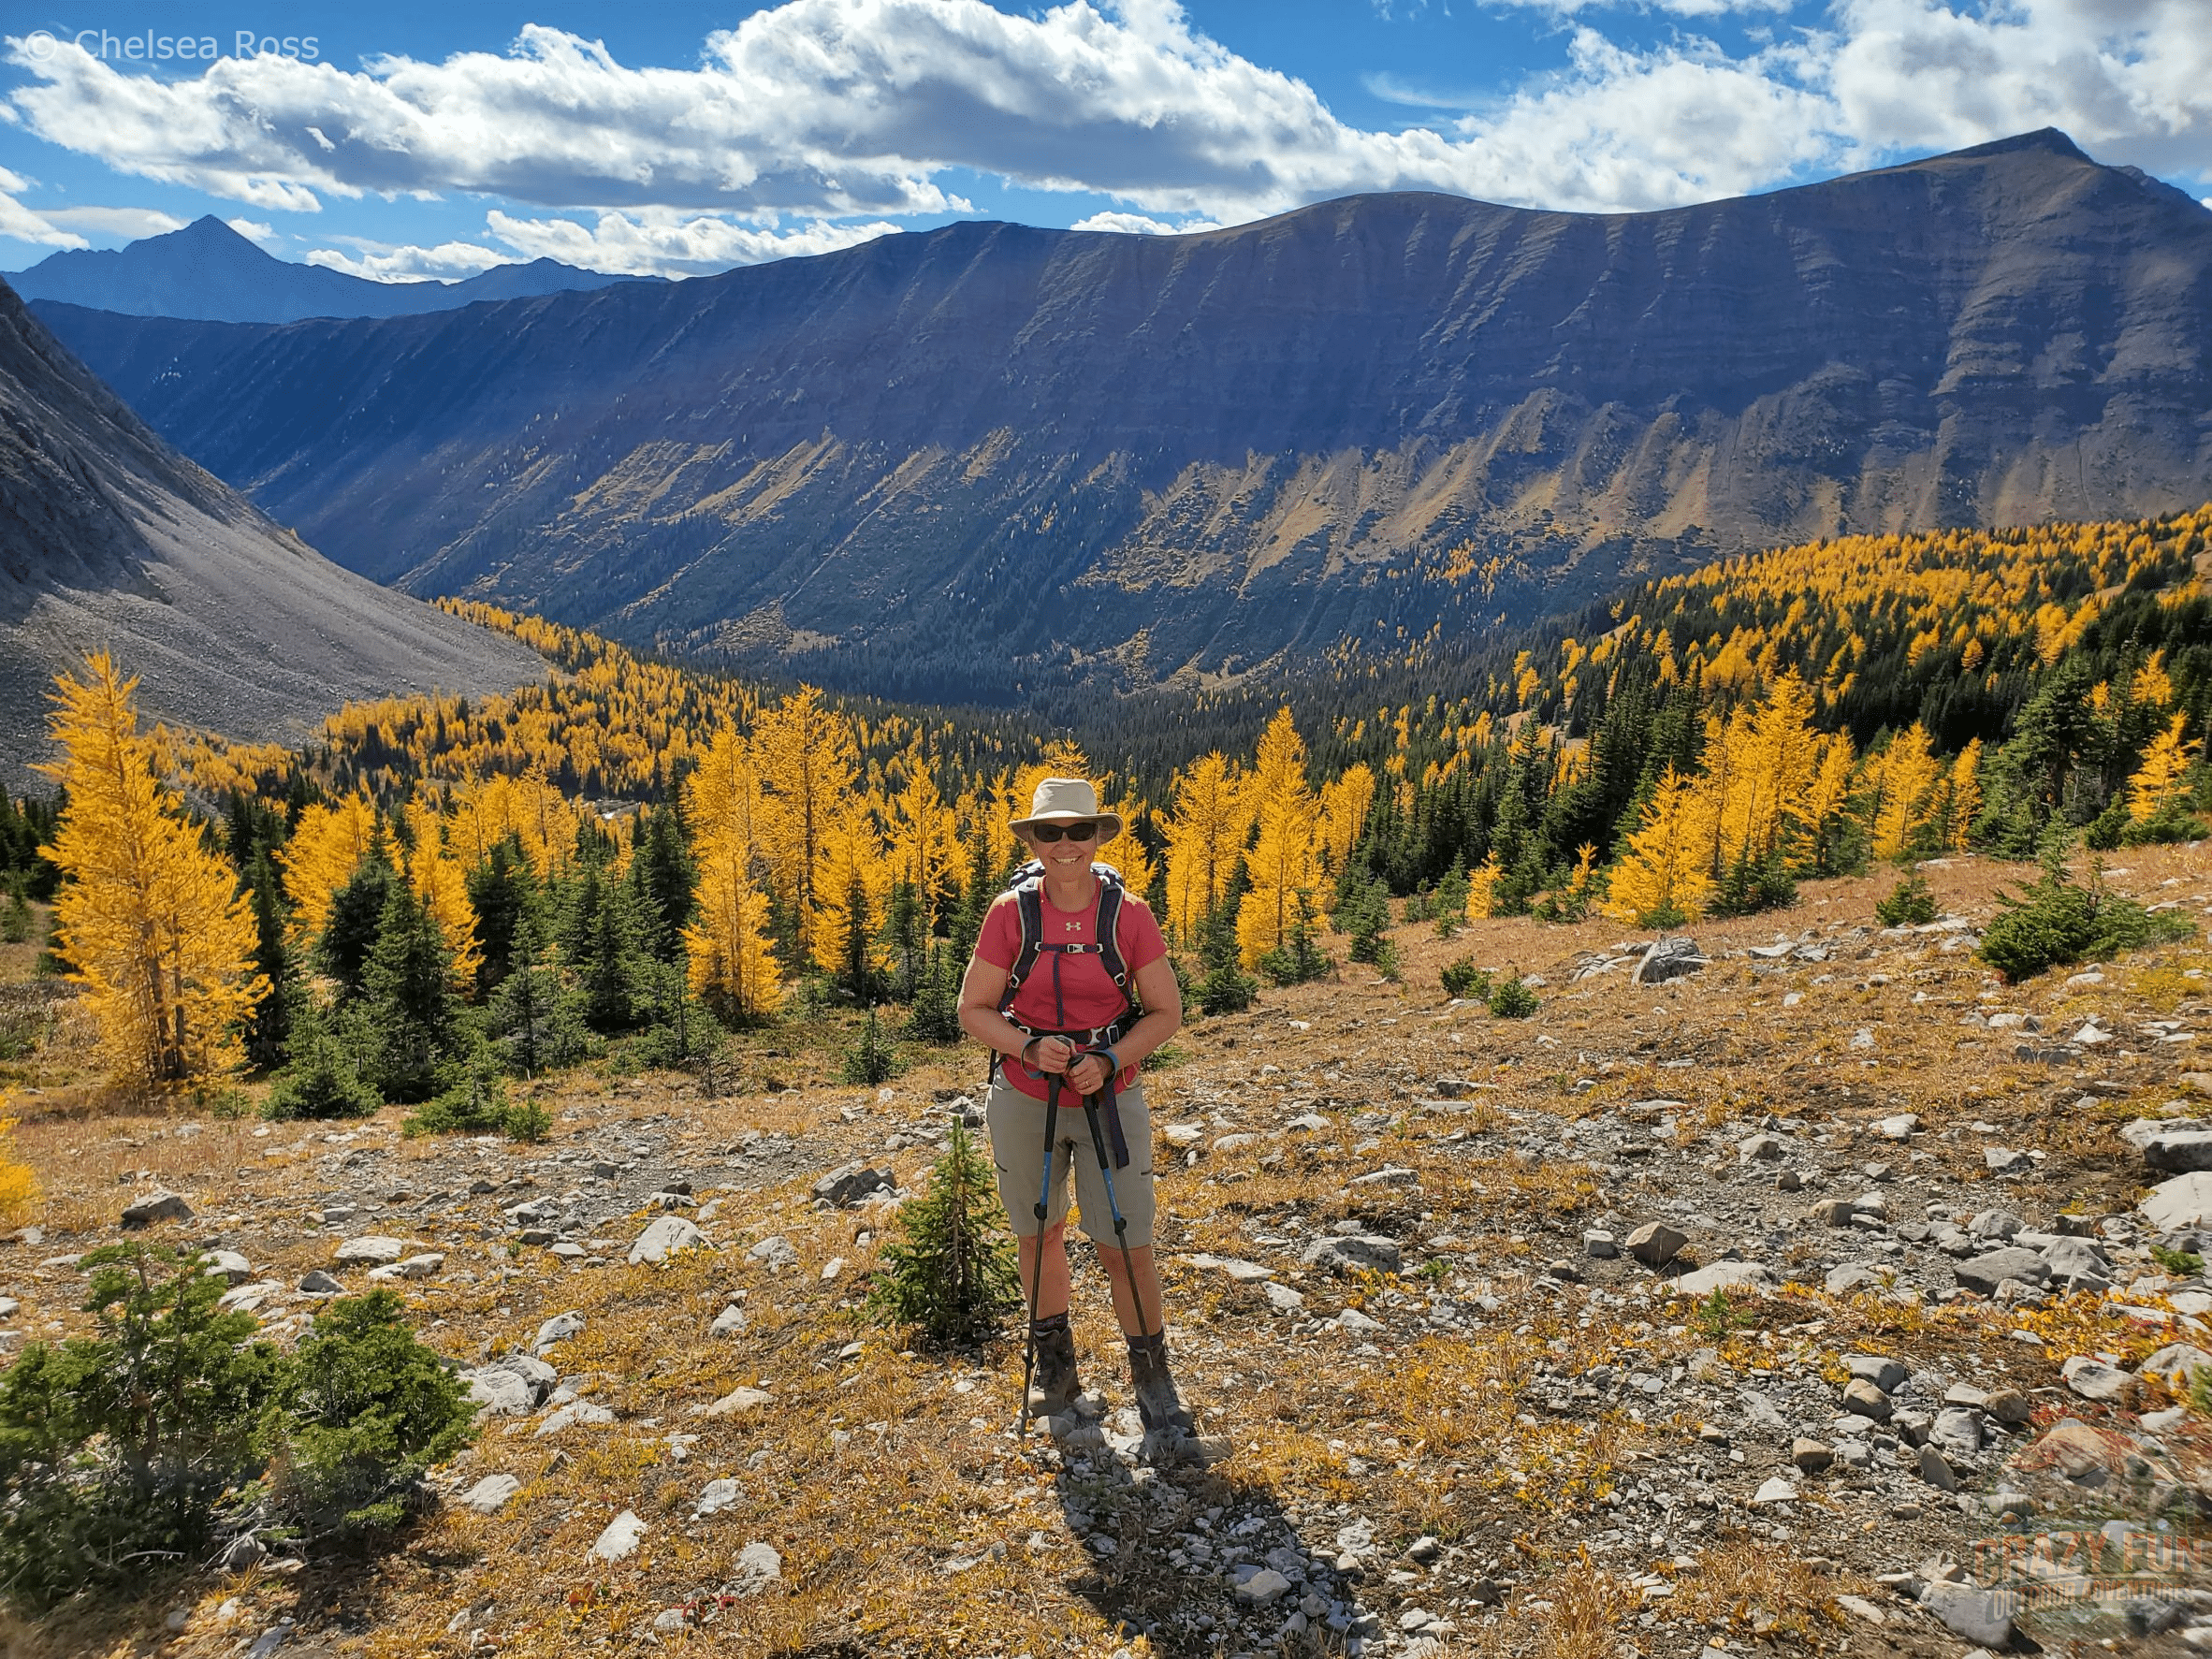 My mom standing in front of larches and mountains.